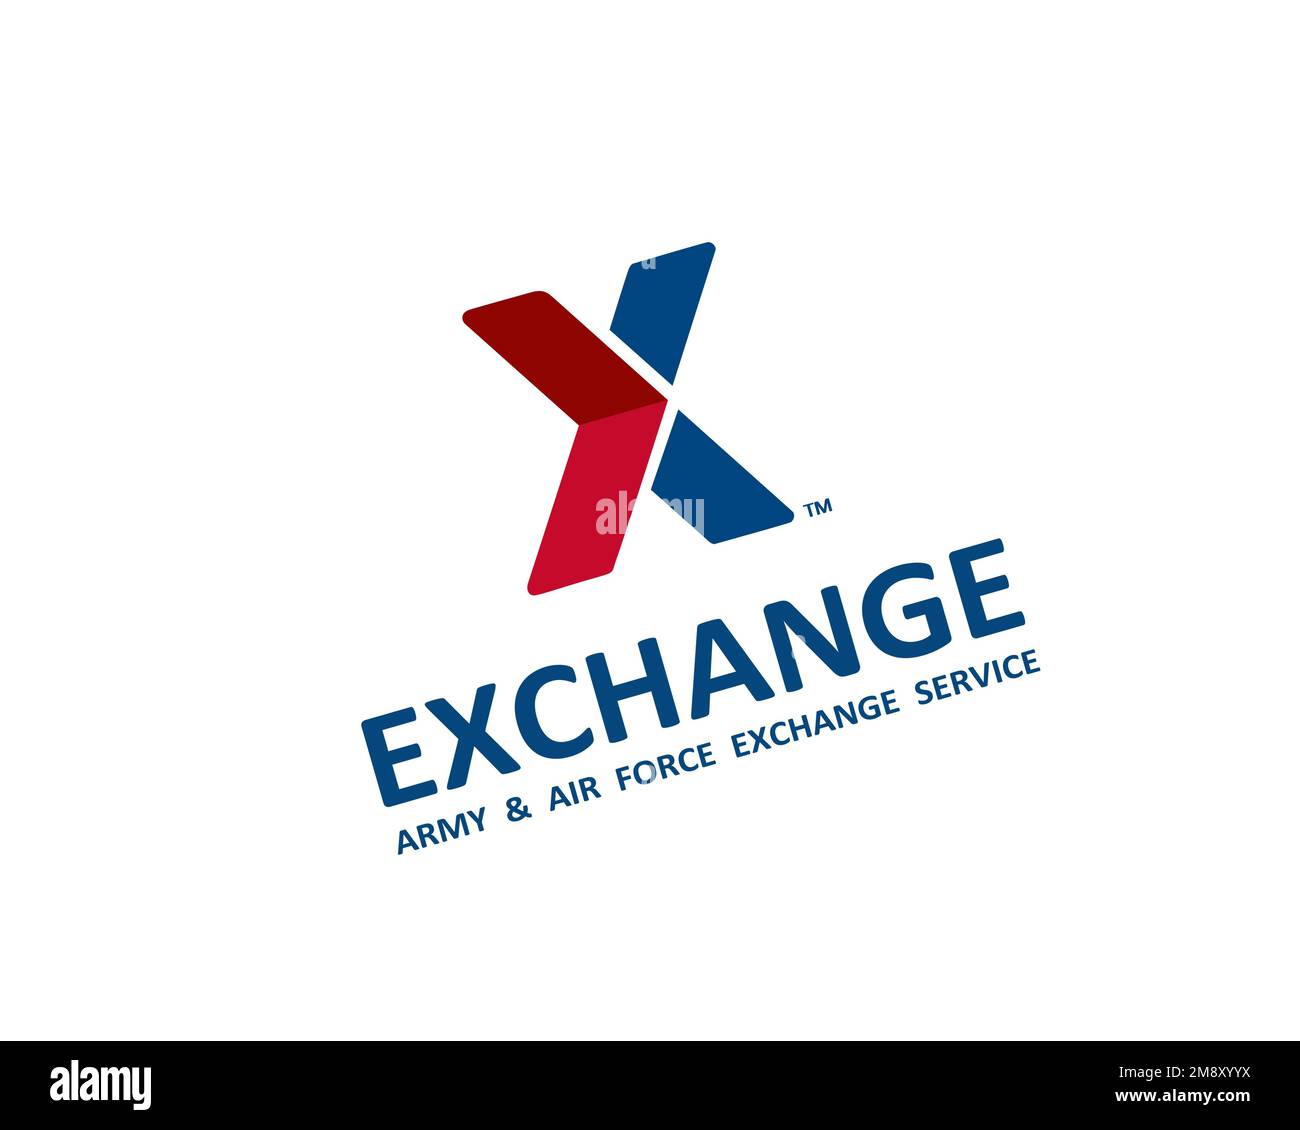 Shop Army & Air Force Exchange Service